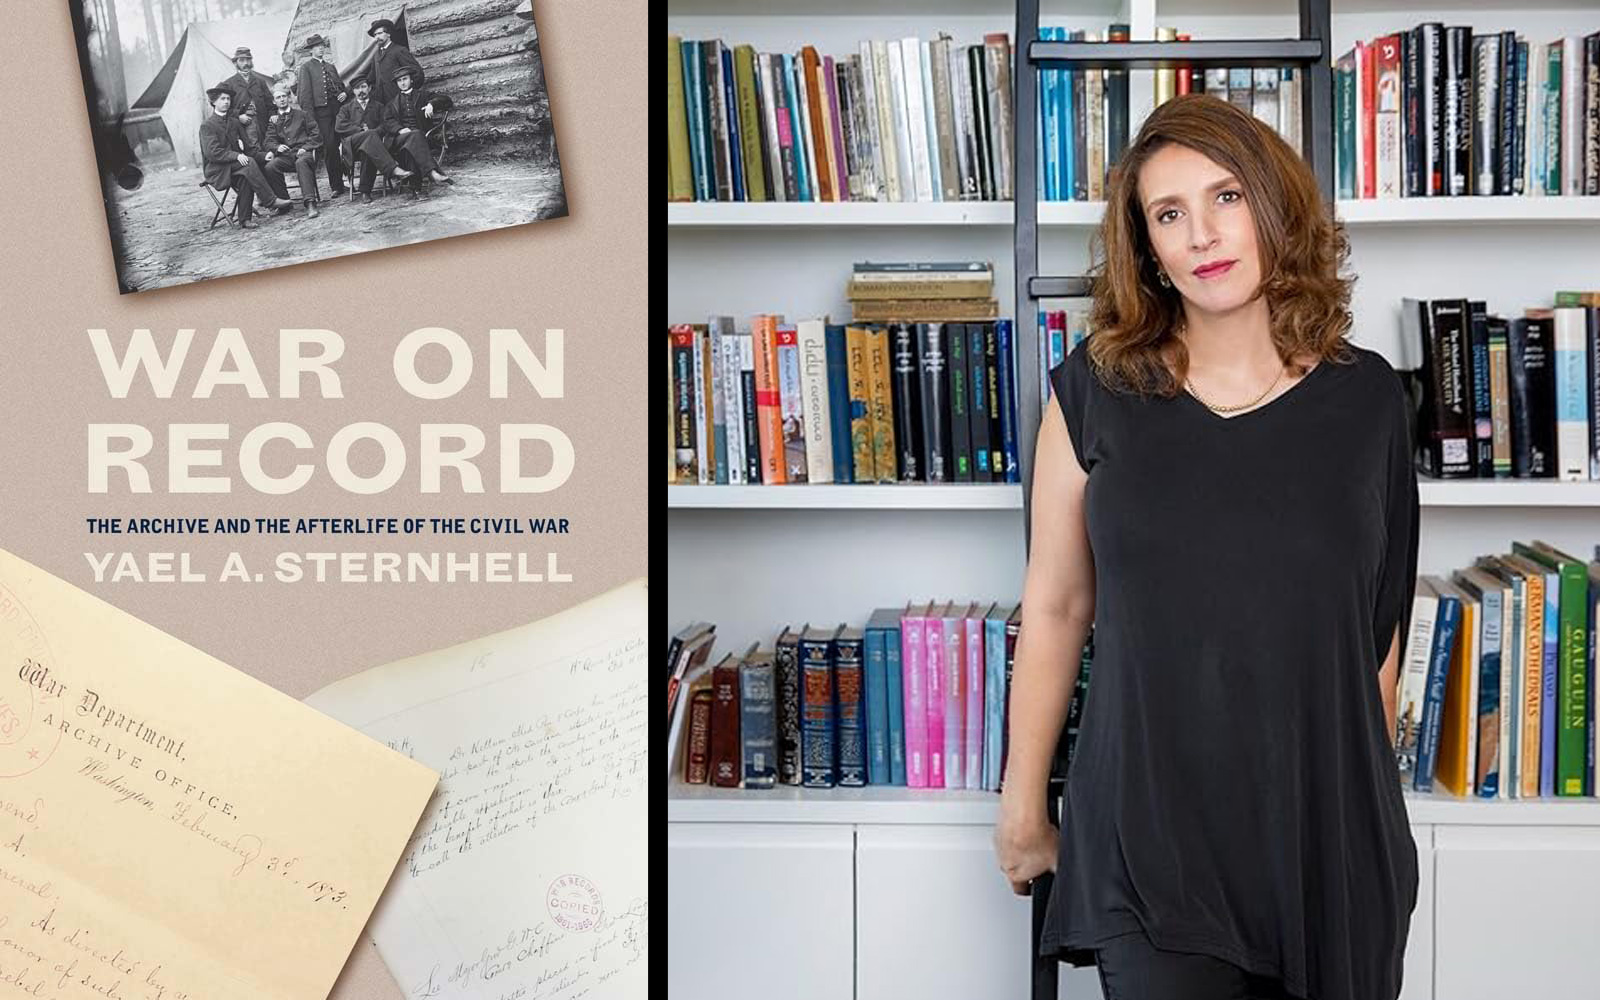 Dr. Yael Sternhell and her latest book, War on Record: The Archive and Afterlife of the of the Civil War